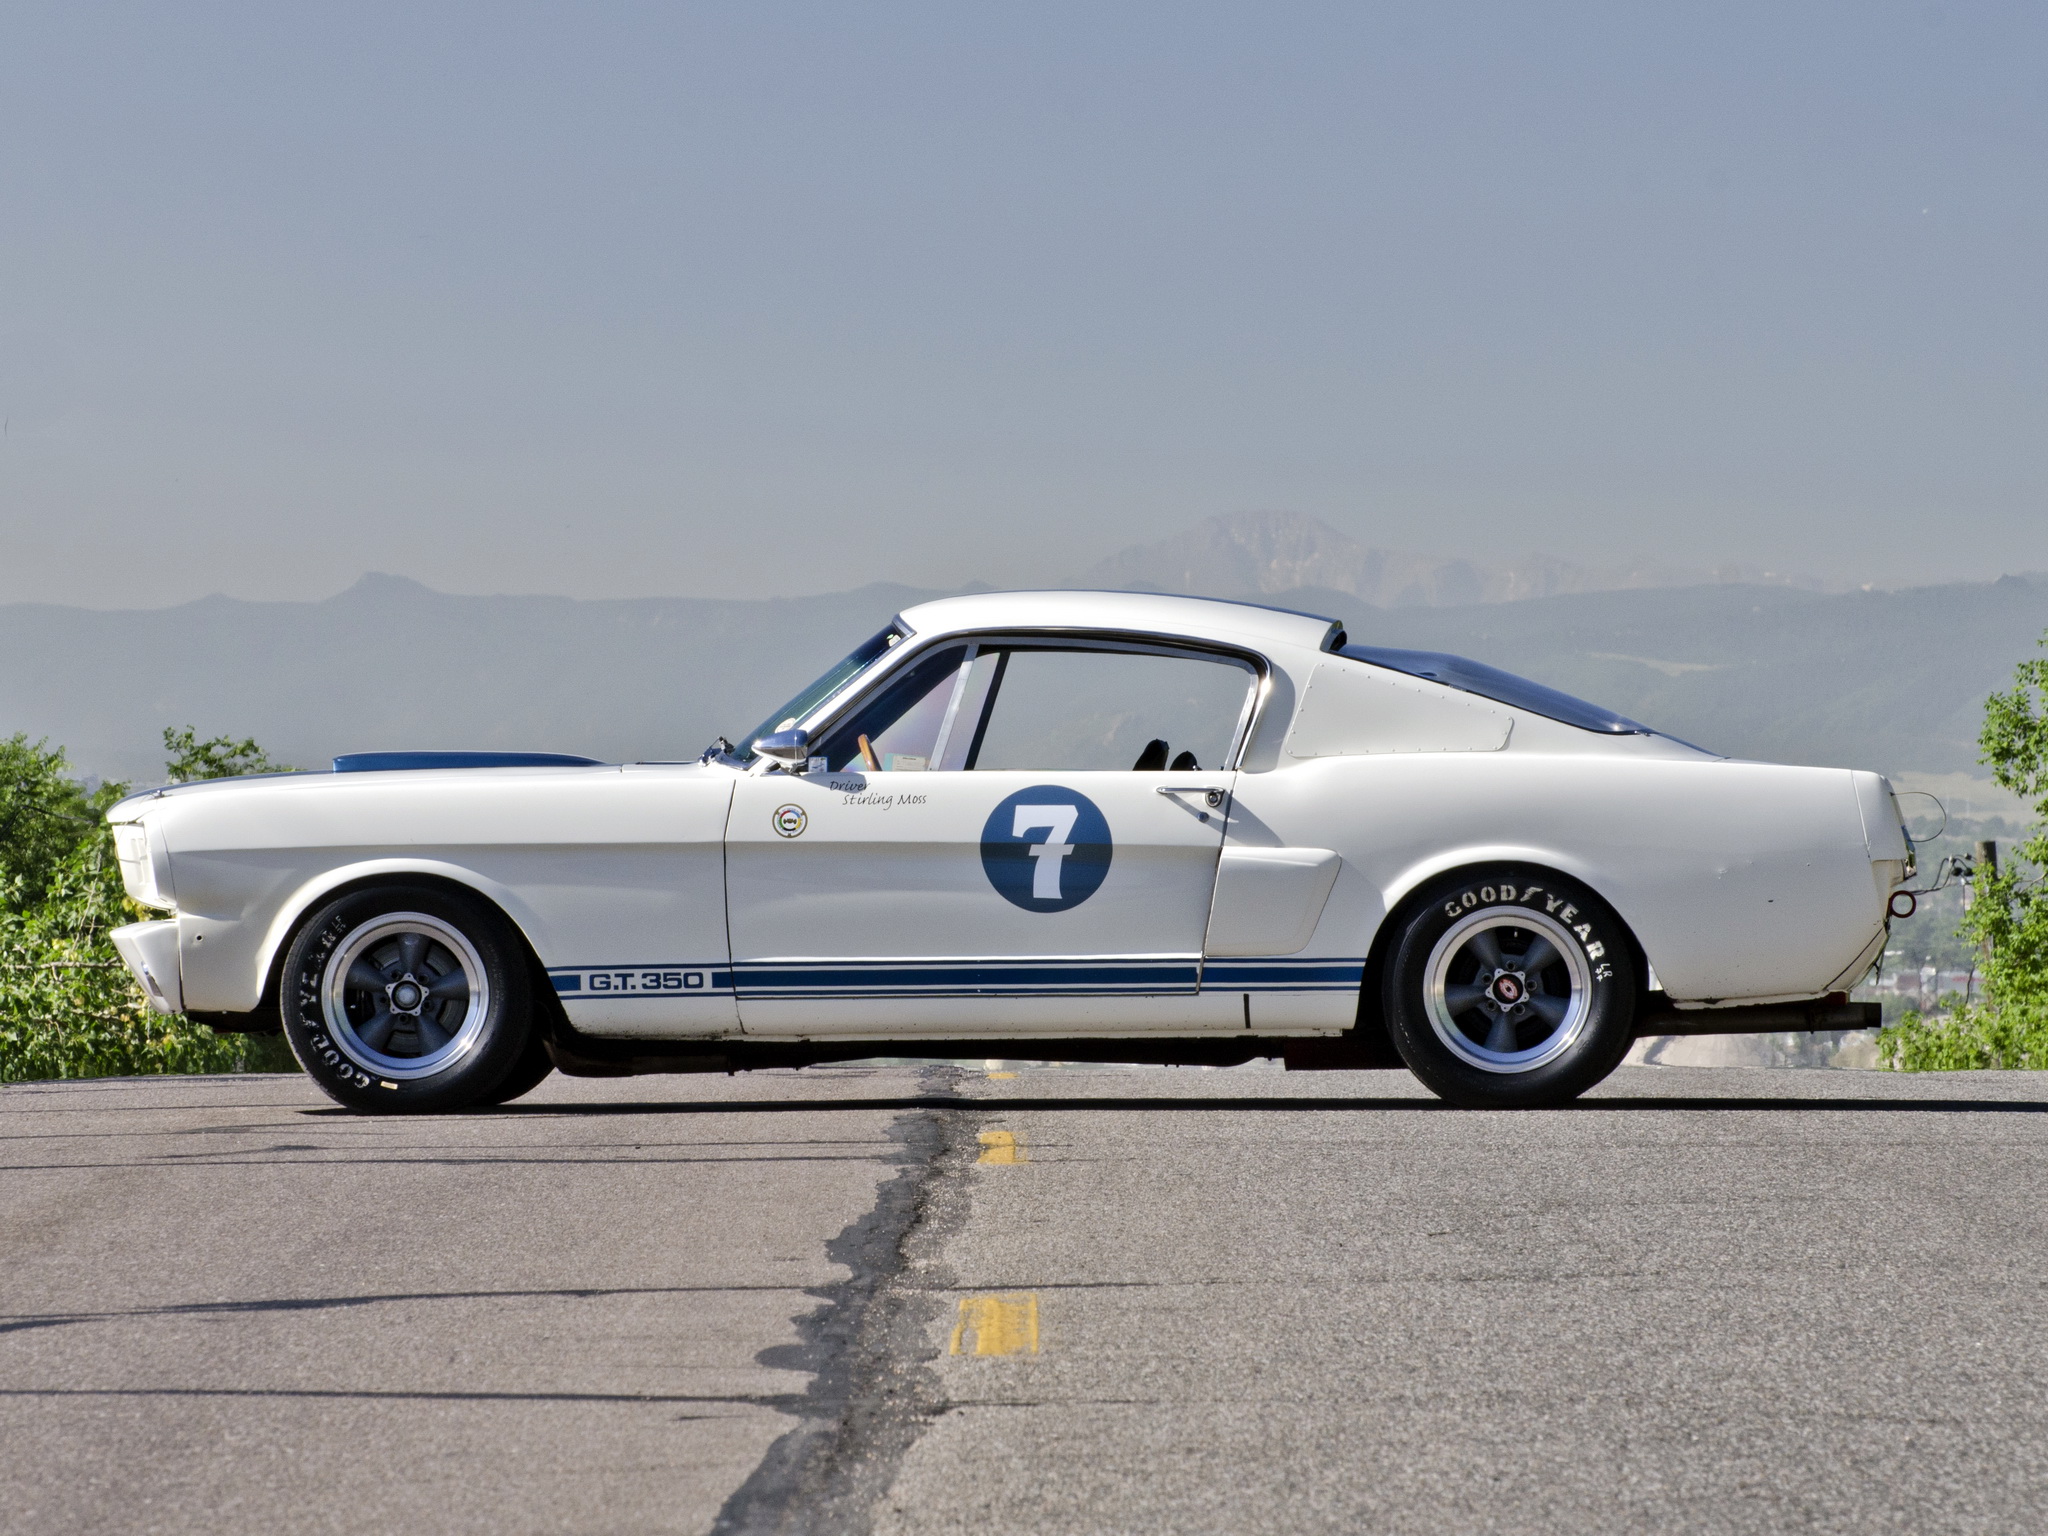 1965, Shelby, Gt350r, Ford, Mustang, Classic, Muscle, Supercar, Supercars, Hot, Rod, Rods Wallpaper